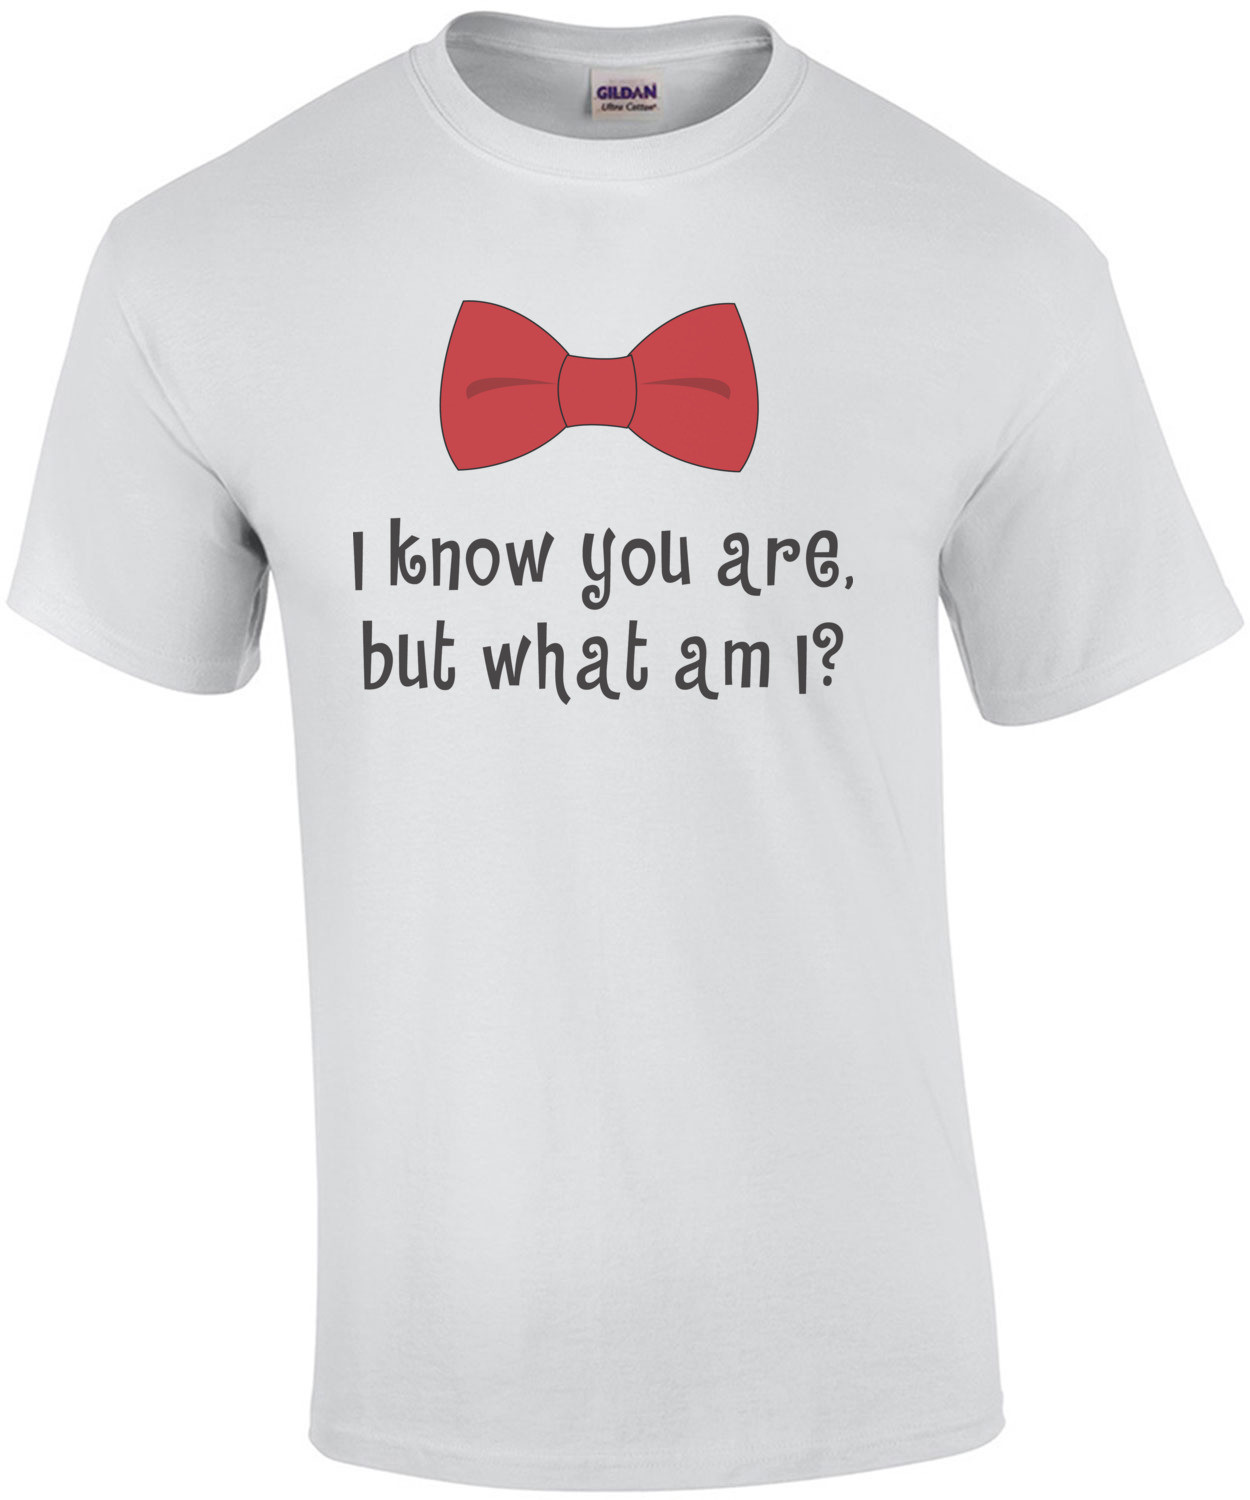 I Know You Are, But What Am I? peewee 80's T-shirt